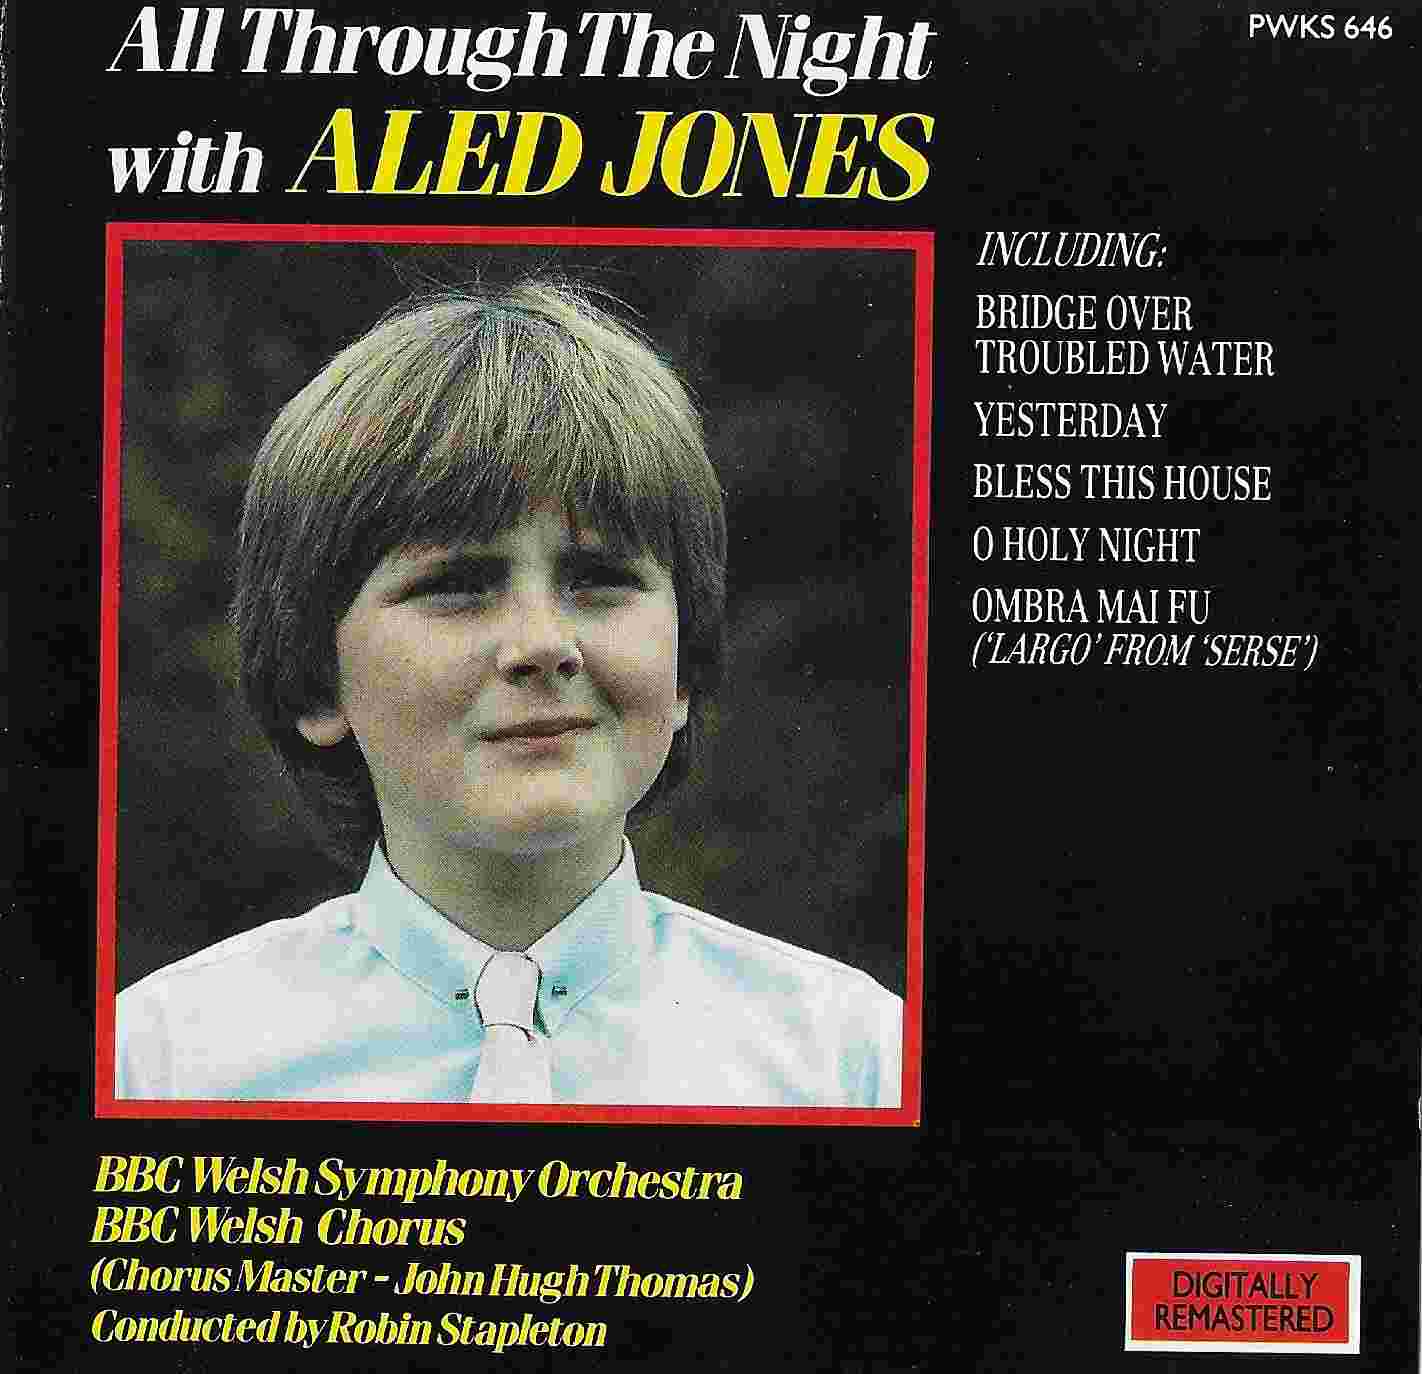 Picture of PWKS 646 All through the night by artist Aled Jones from the BBC cds - Records and Tapes library